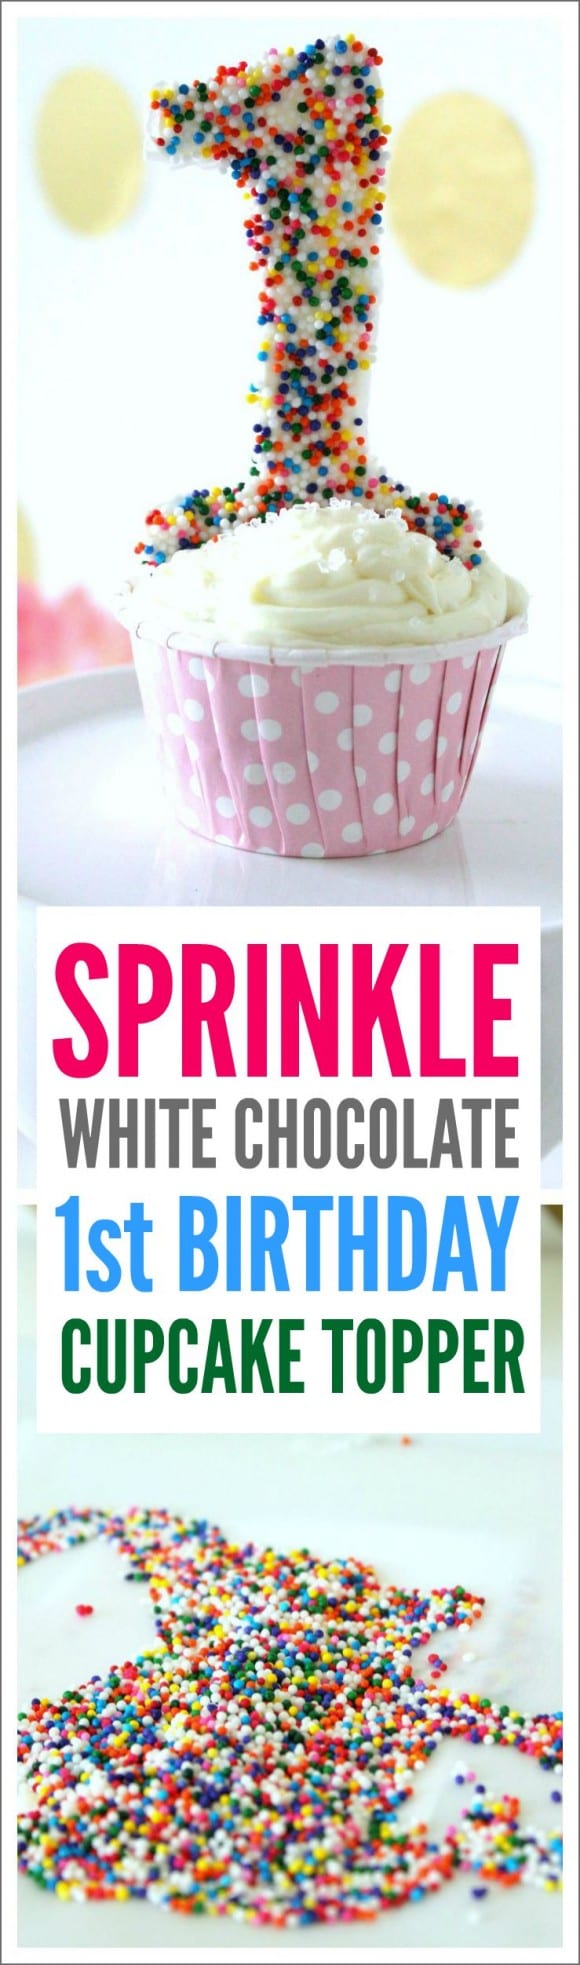 Learn to make this sprinkle 1st birthday cupcake topper! See more party 1st birthday party ideas at CatchMyParty.com!